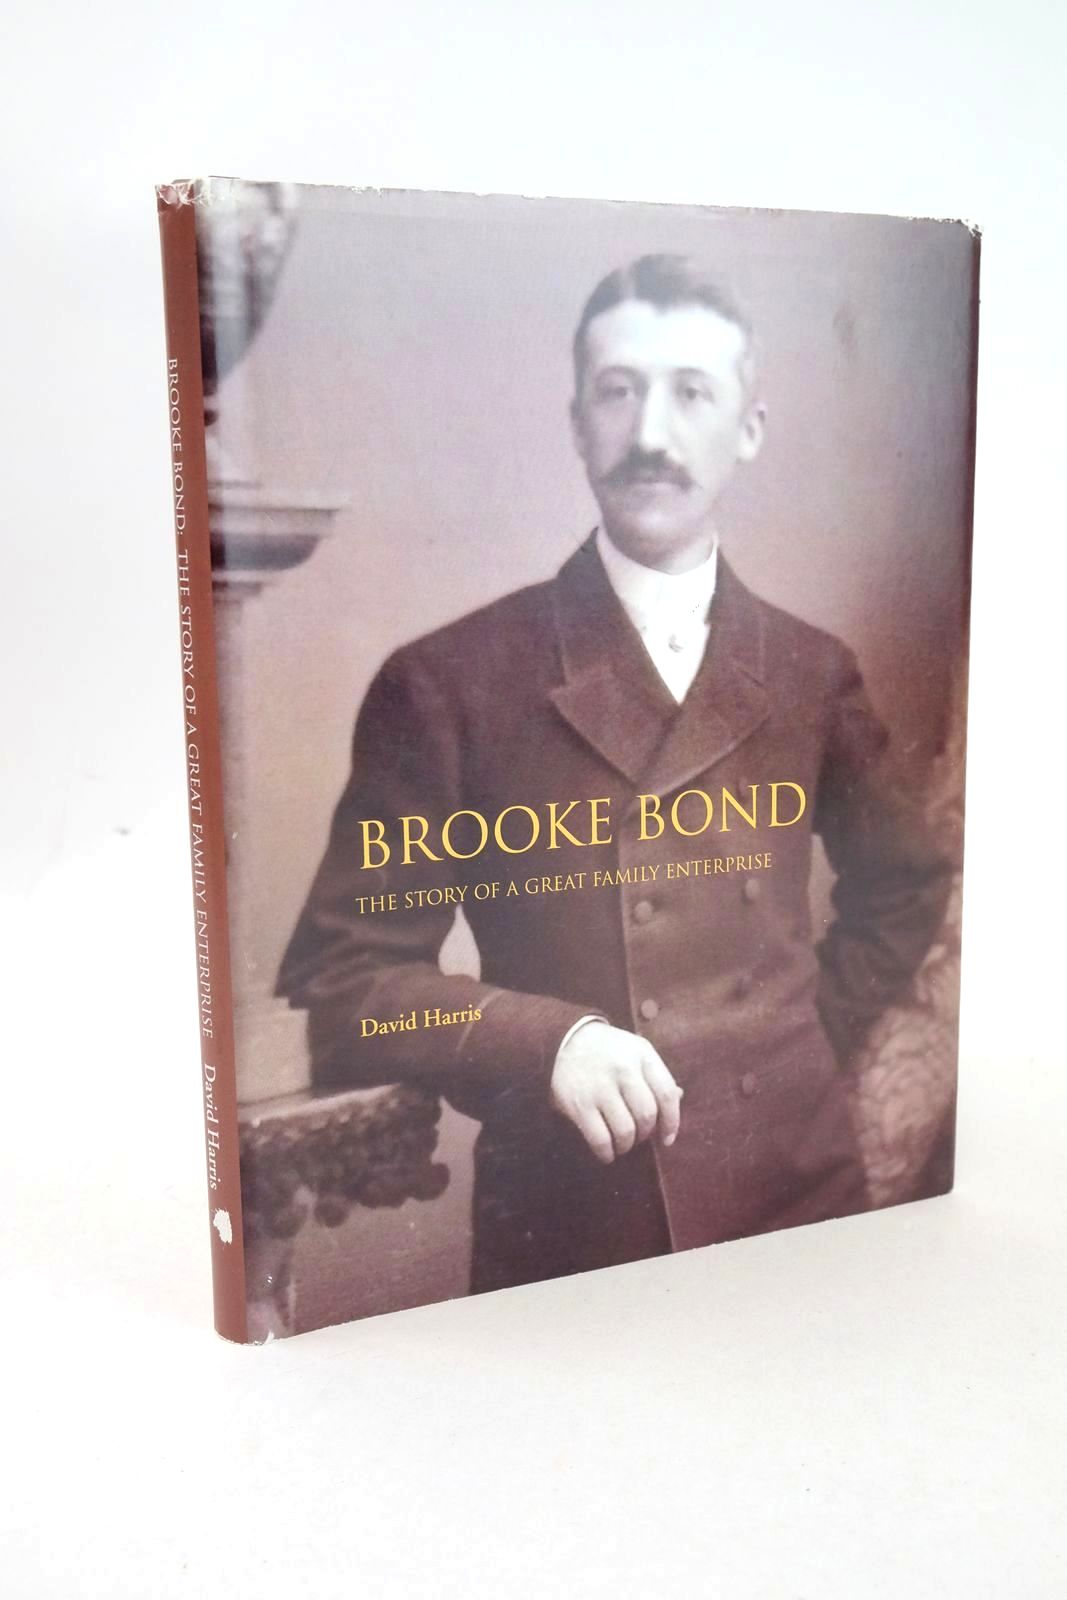 Photo of BROOKE BOND THE STORY OF A GREAT FAMILY ENTERPRISE written by Harris, David published by David Harris (STOCK CODE: 1326528)  for sale by Stella & Rose's Books